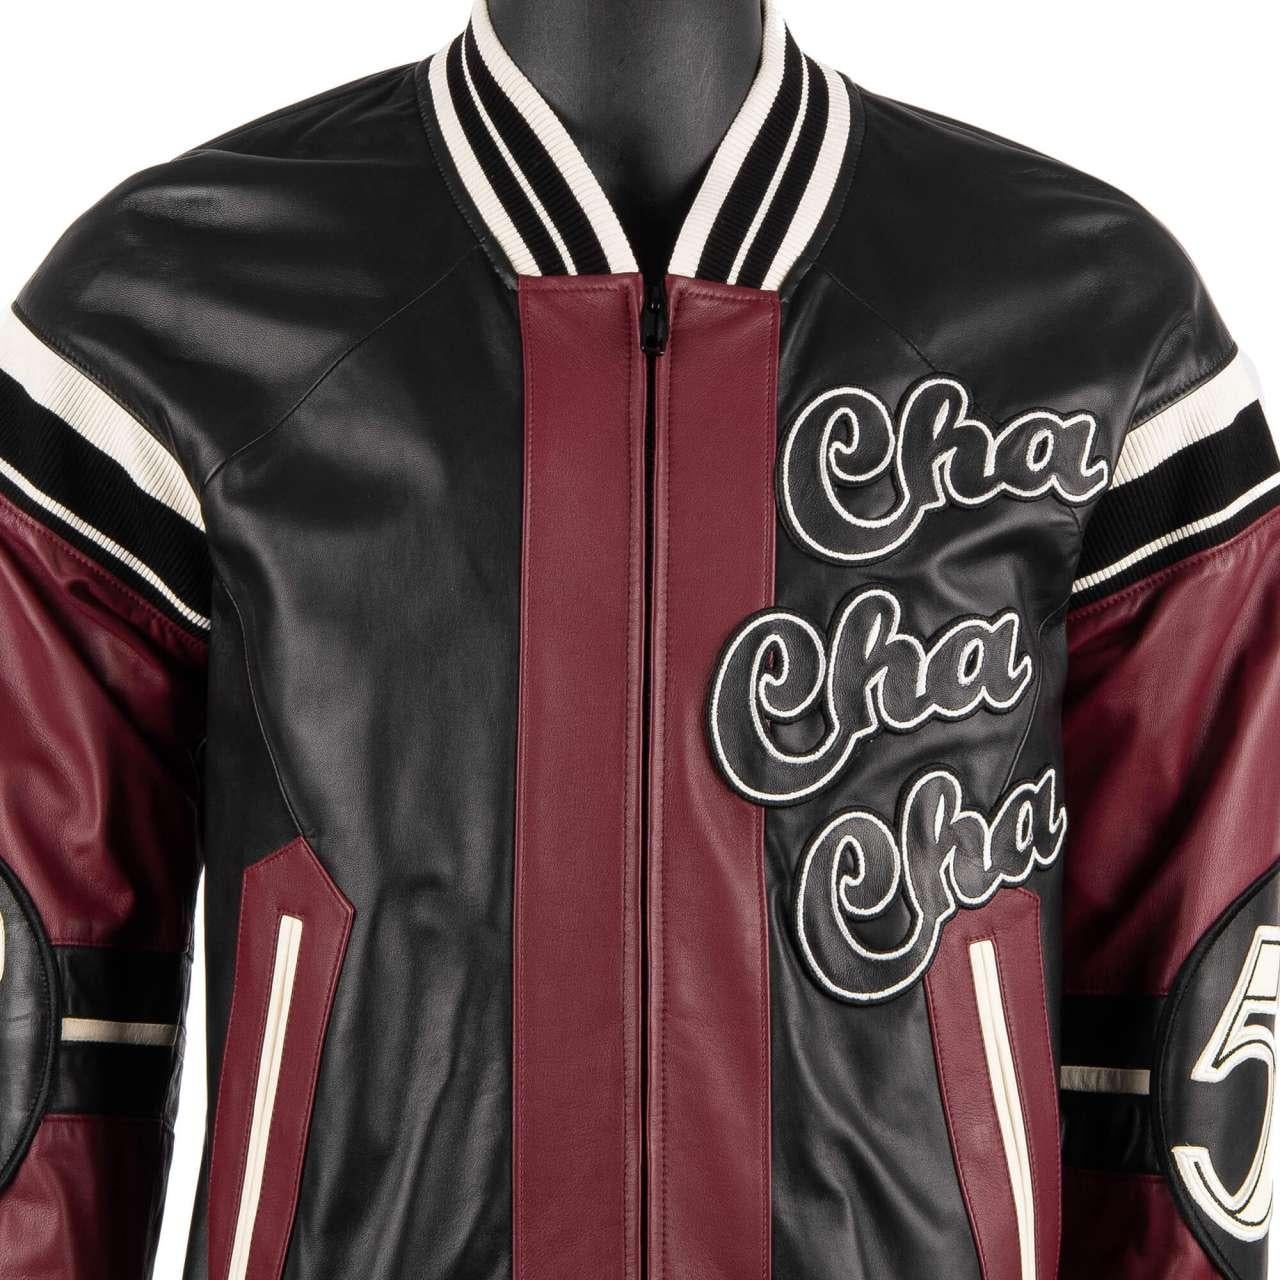 D&G Club Lounge Cello Embroidered Bomber Leather Jacket Black Bordeaux 48 For Sale 1